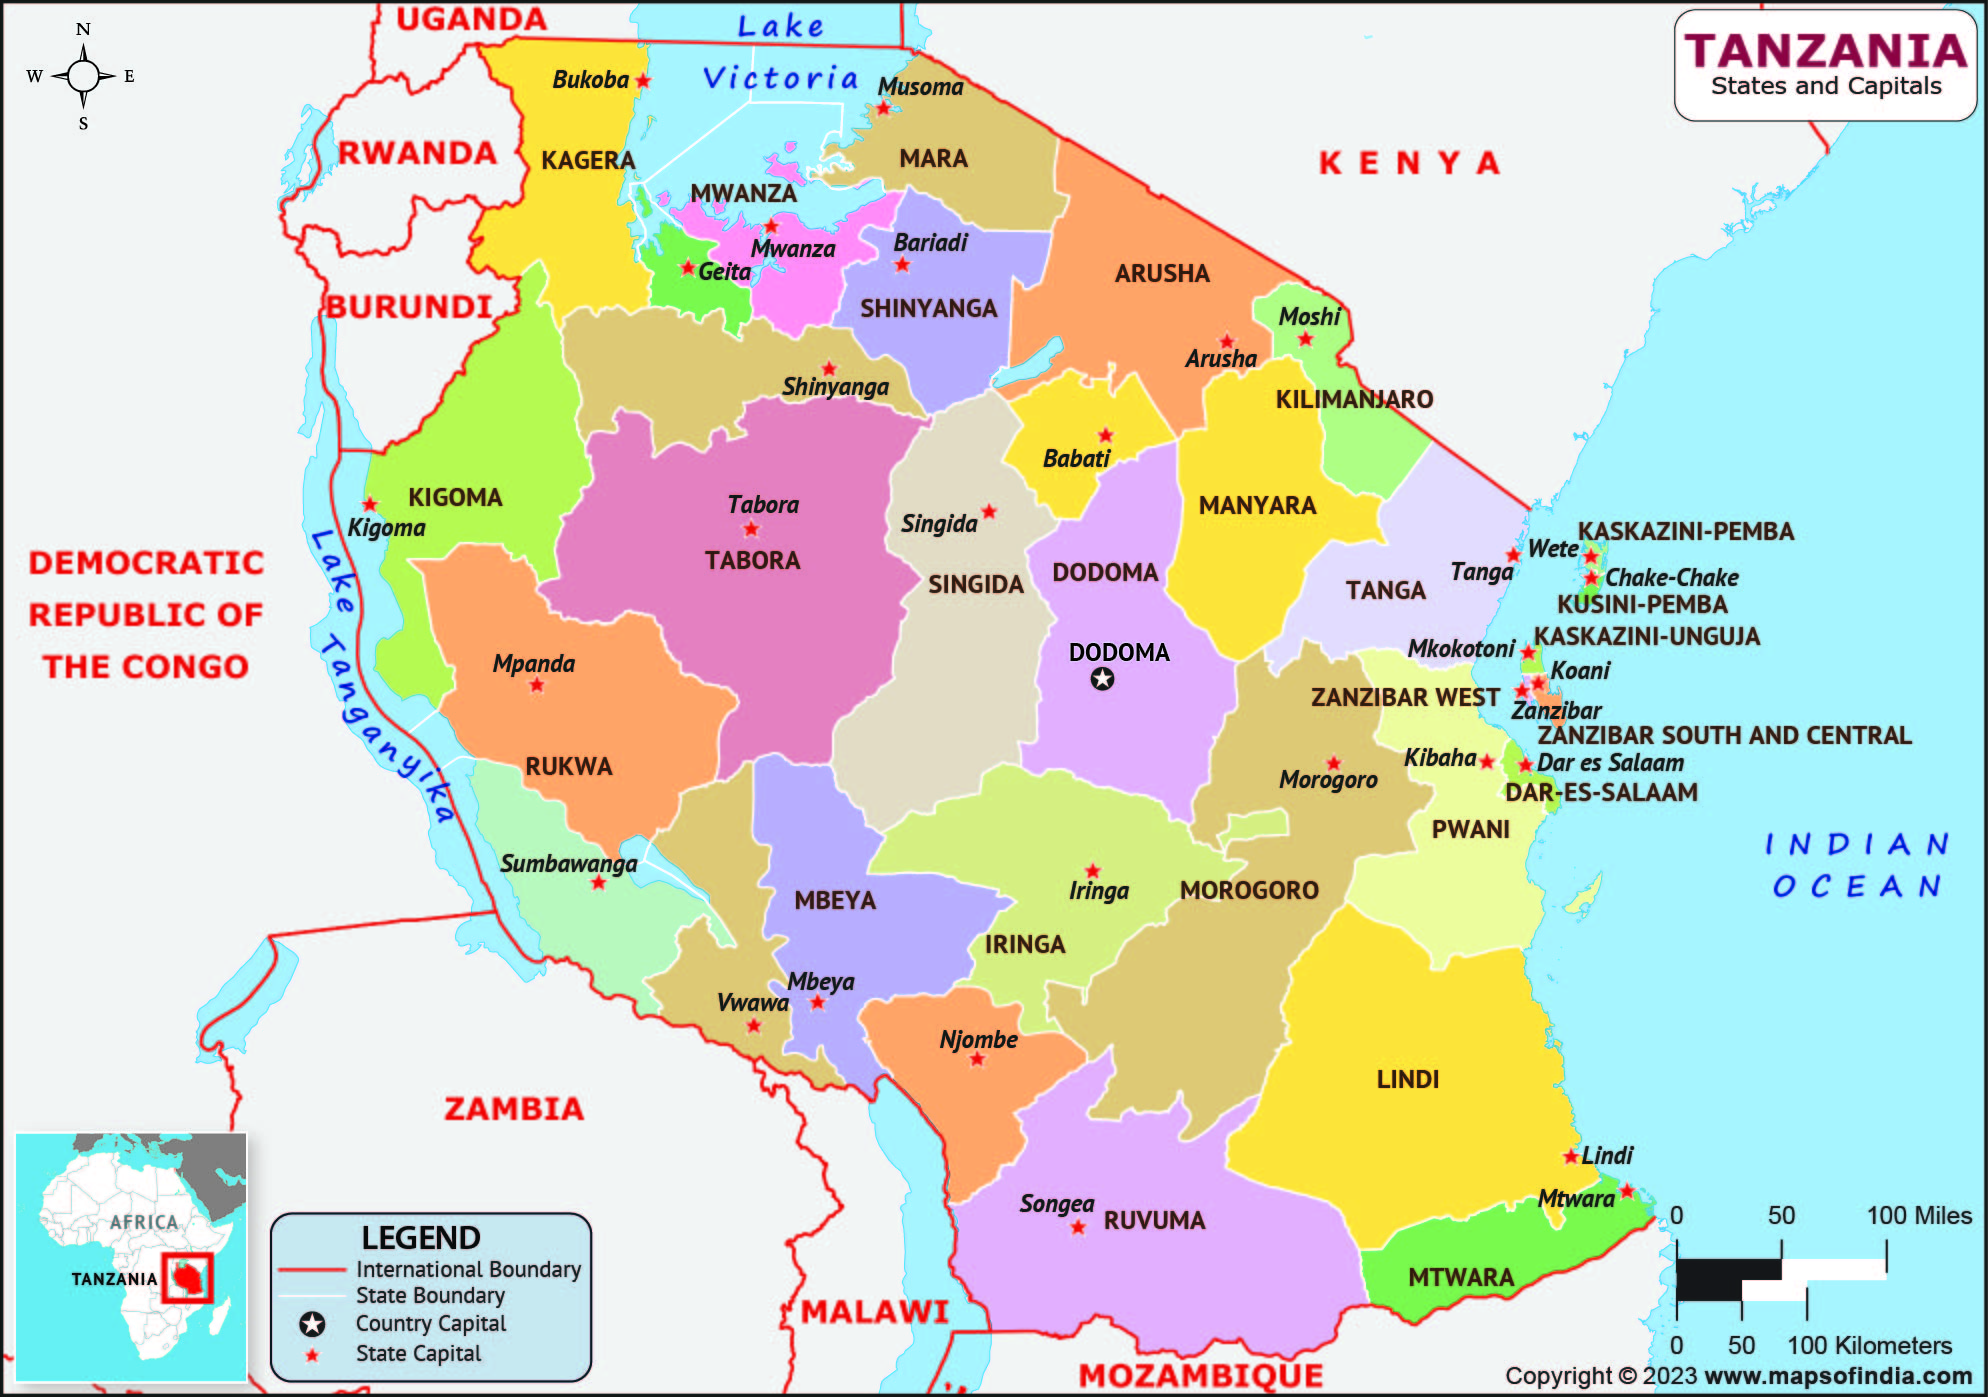 Tanzania States and Capitals List and Map | List of States and Capitals ...